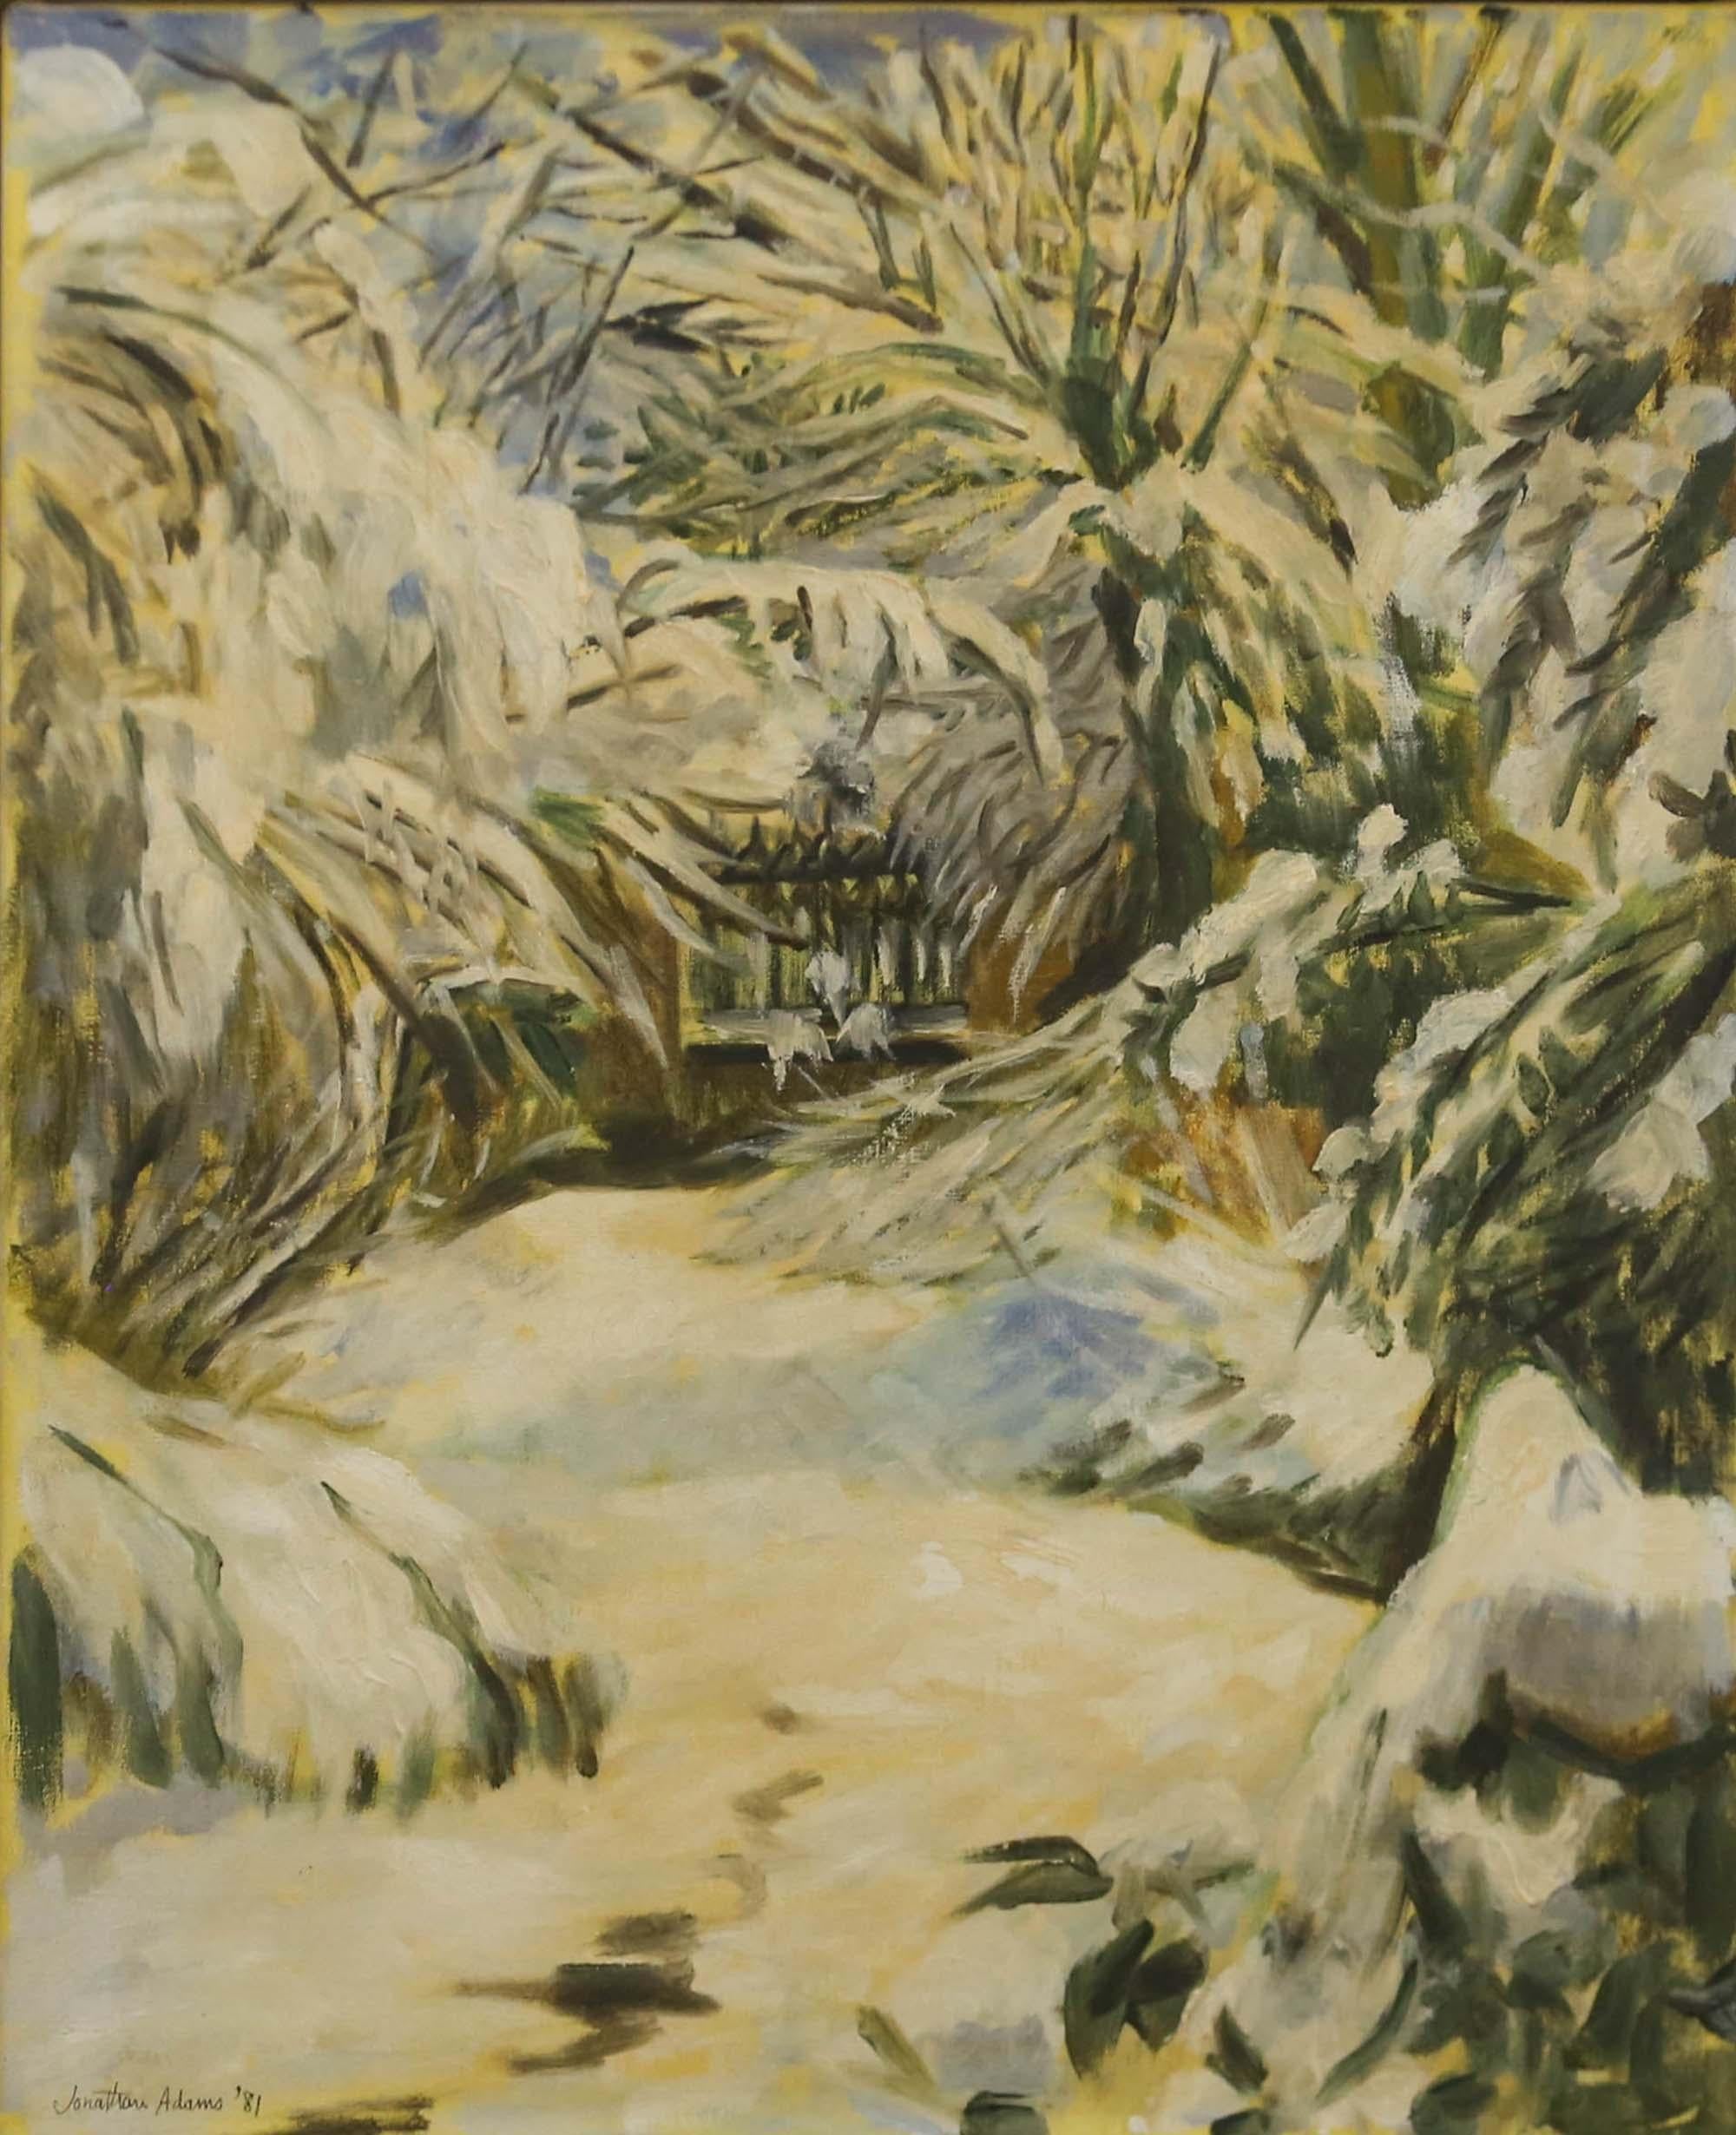 A fine 20th Century snowy scene in oil, showing the trees and undergrowth on the edges of a park, covered in thick, freshly fallen snow. The black metal railings and stone wall of the park boundaries can be seen through the snowy vignette. The